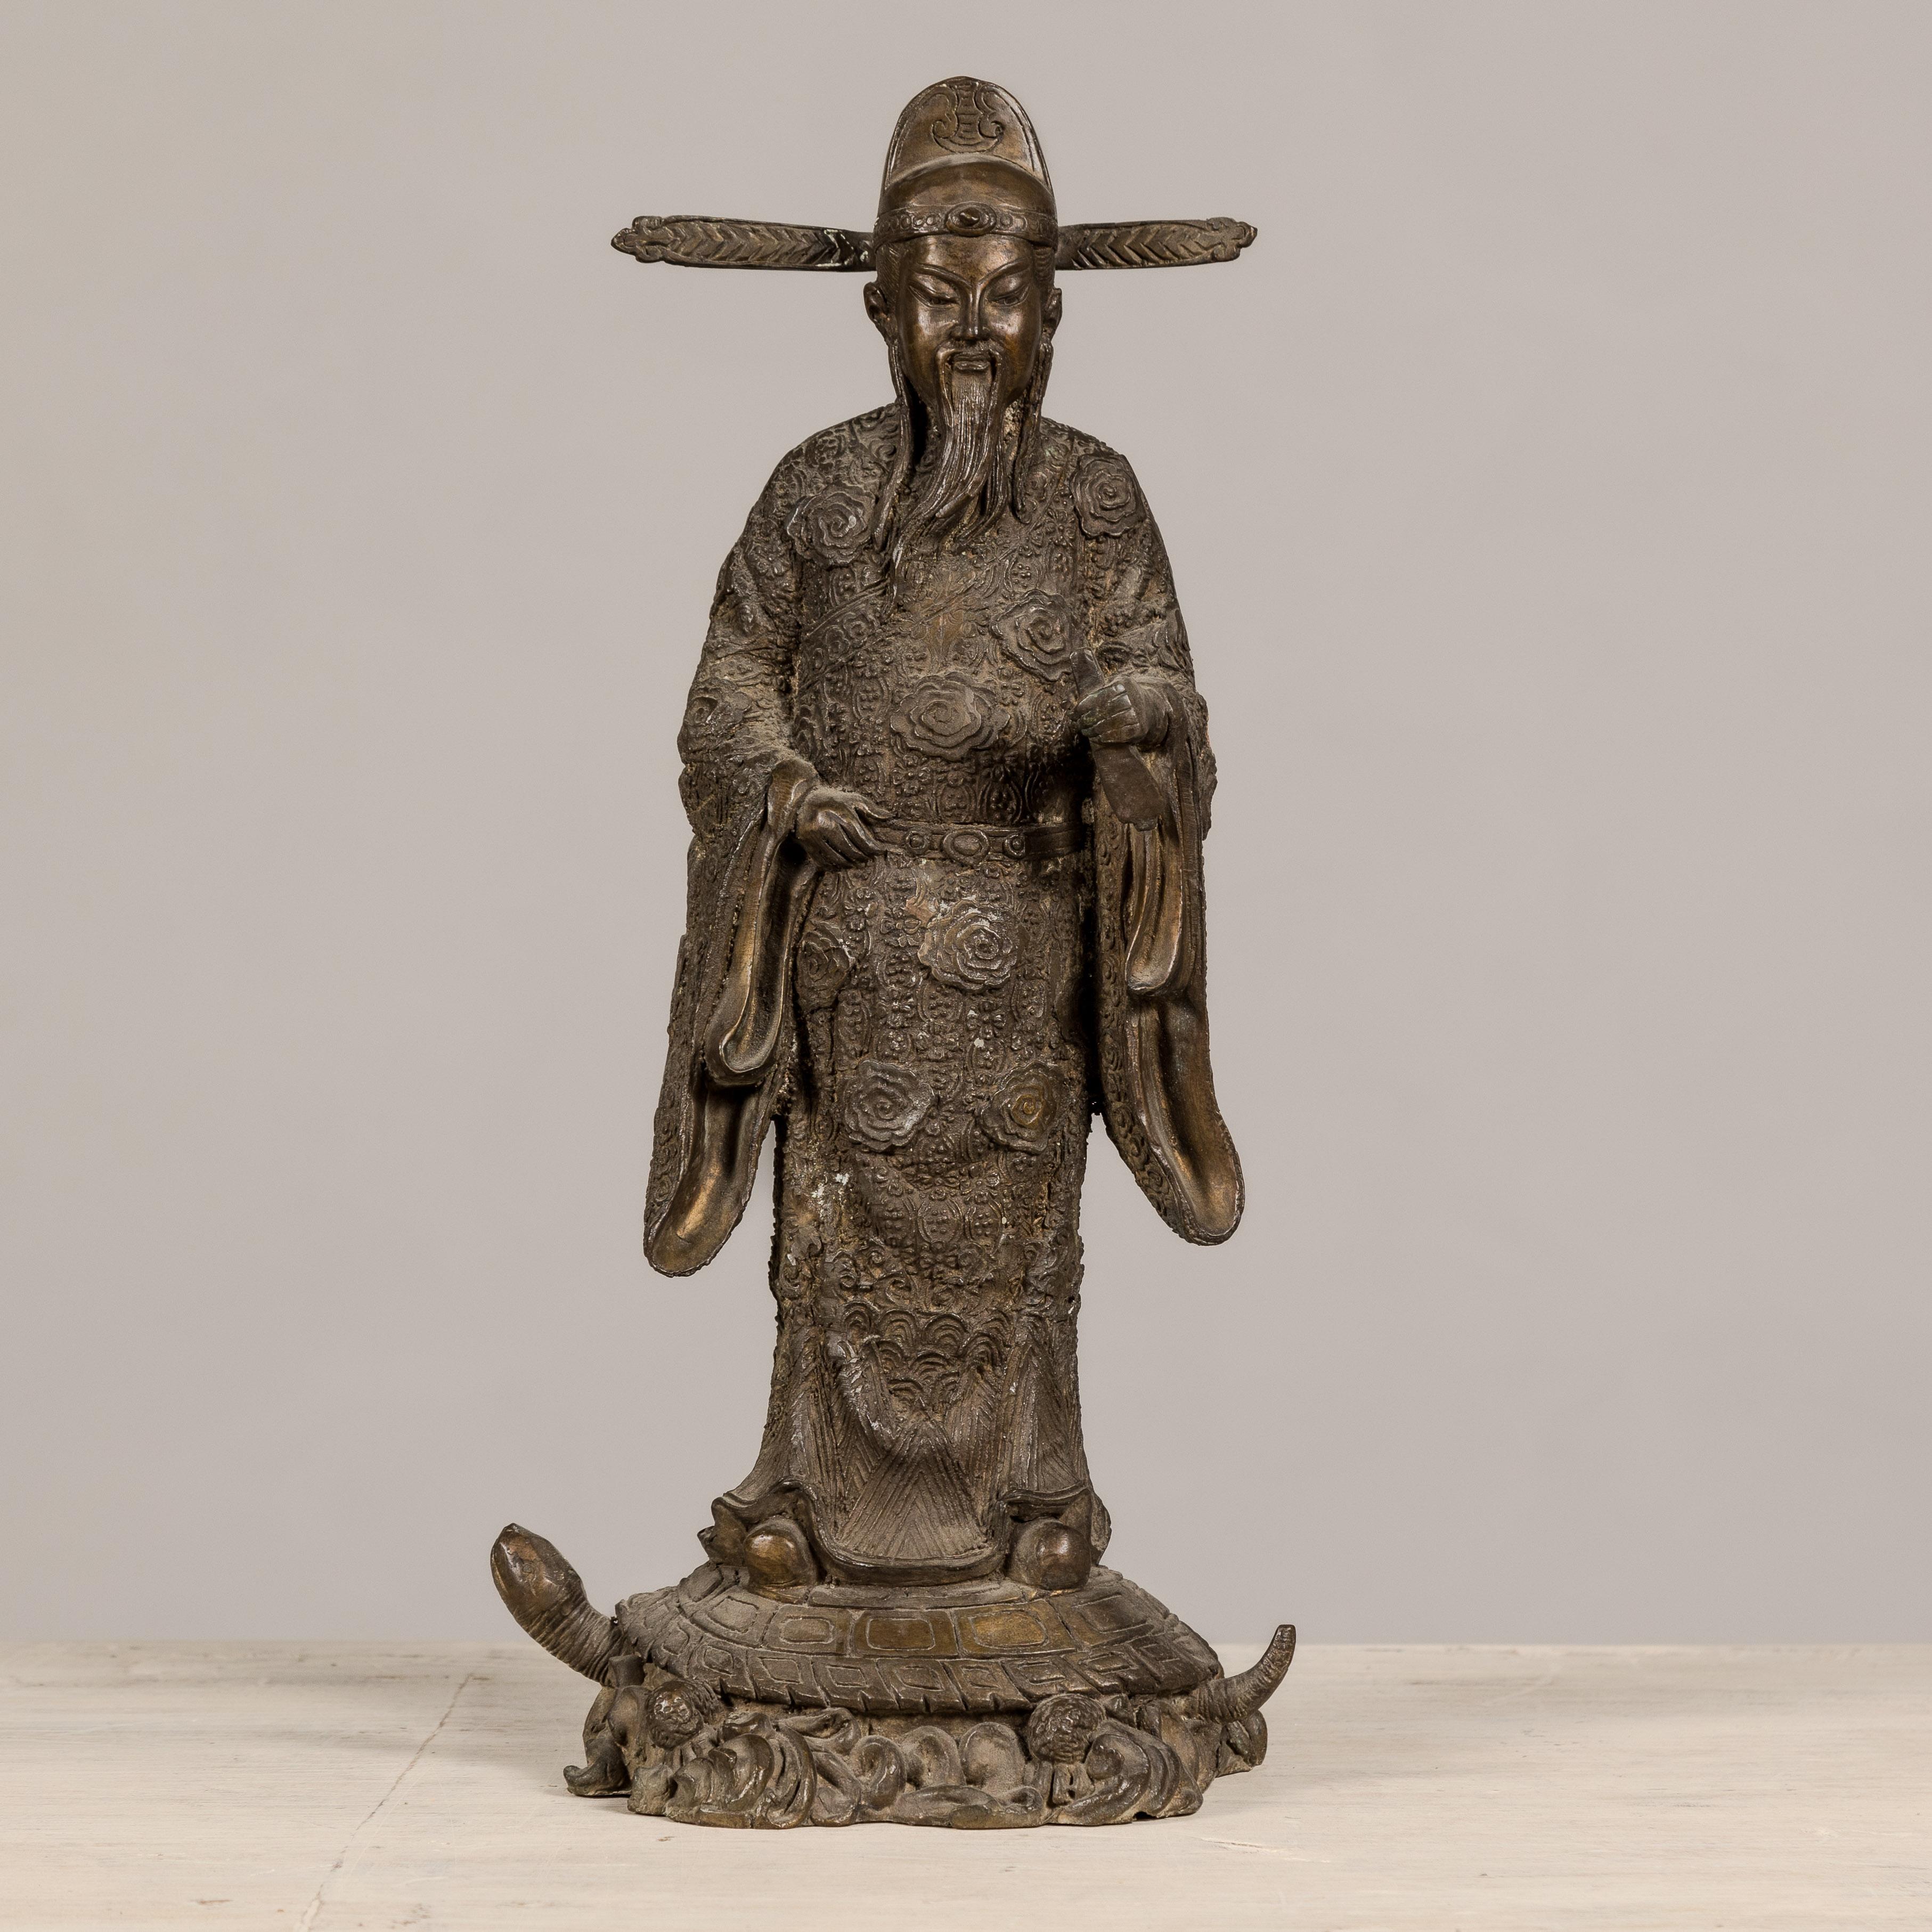 A Chinese vintage bronze statuette depicting a scholar standing on a turtle. This Chinese bronze statuette, exquisitely crafted to depict an old scholar, is a piece that combines traditional symbolism with detailed artistry. 

The statue portrays an